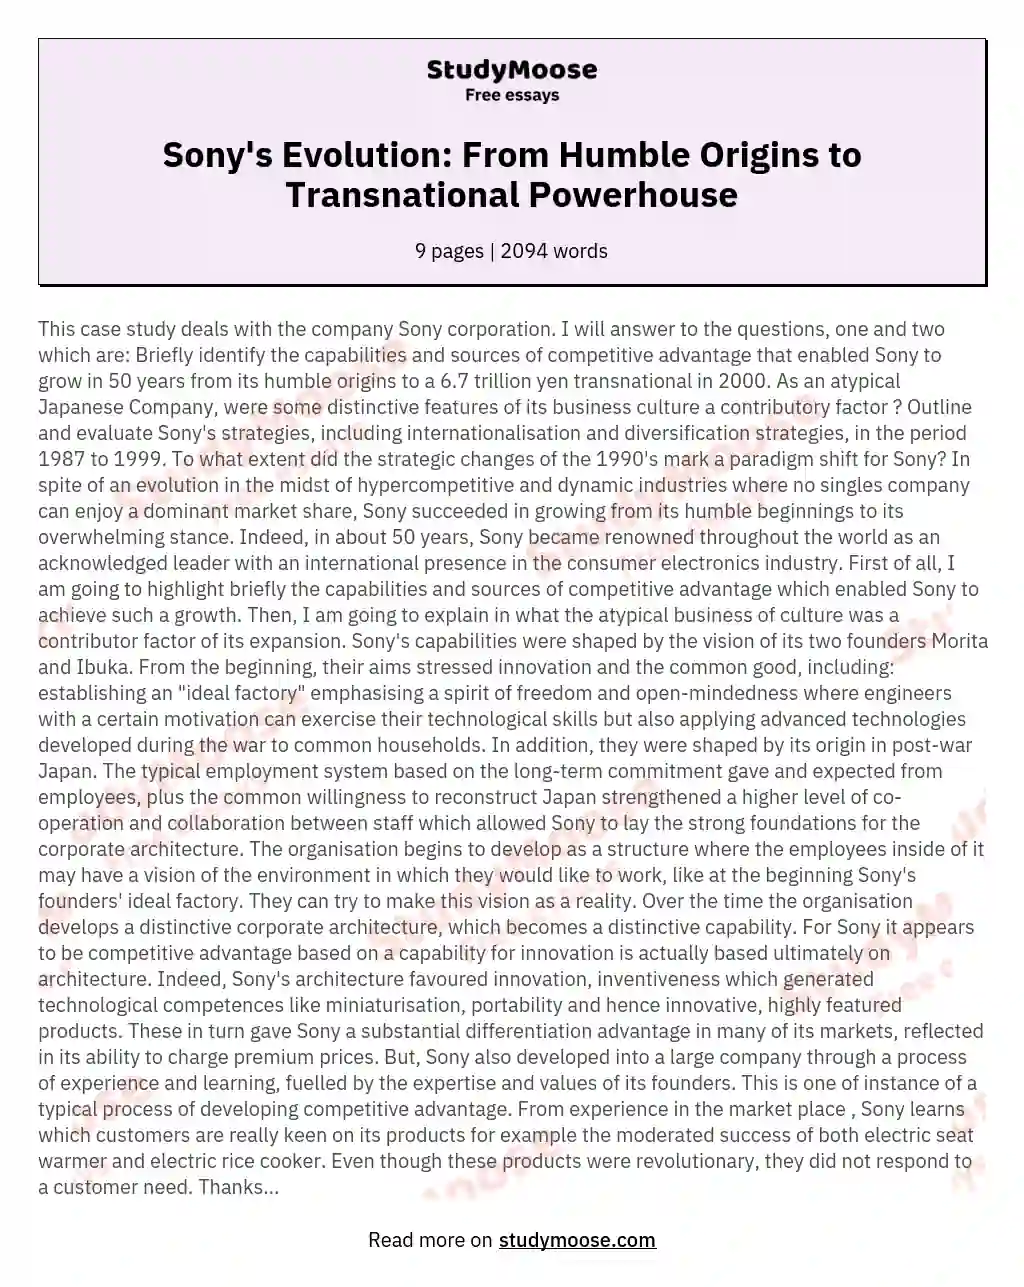 Sony's Evolution: From Humble Origins to Transnational Powerhouse essay